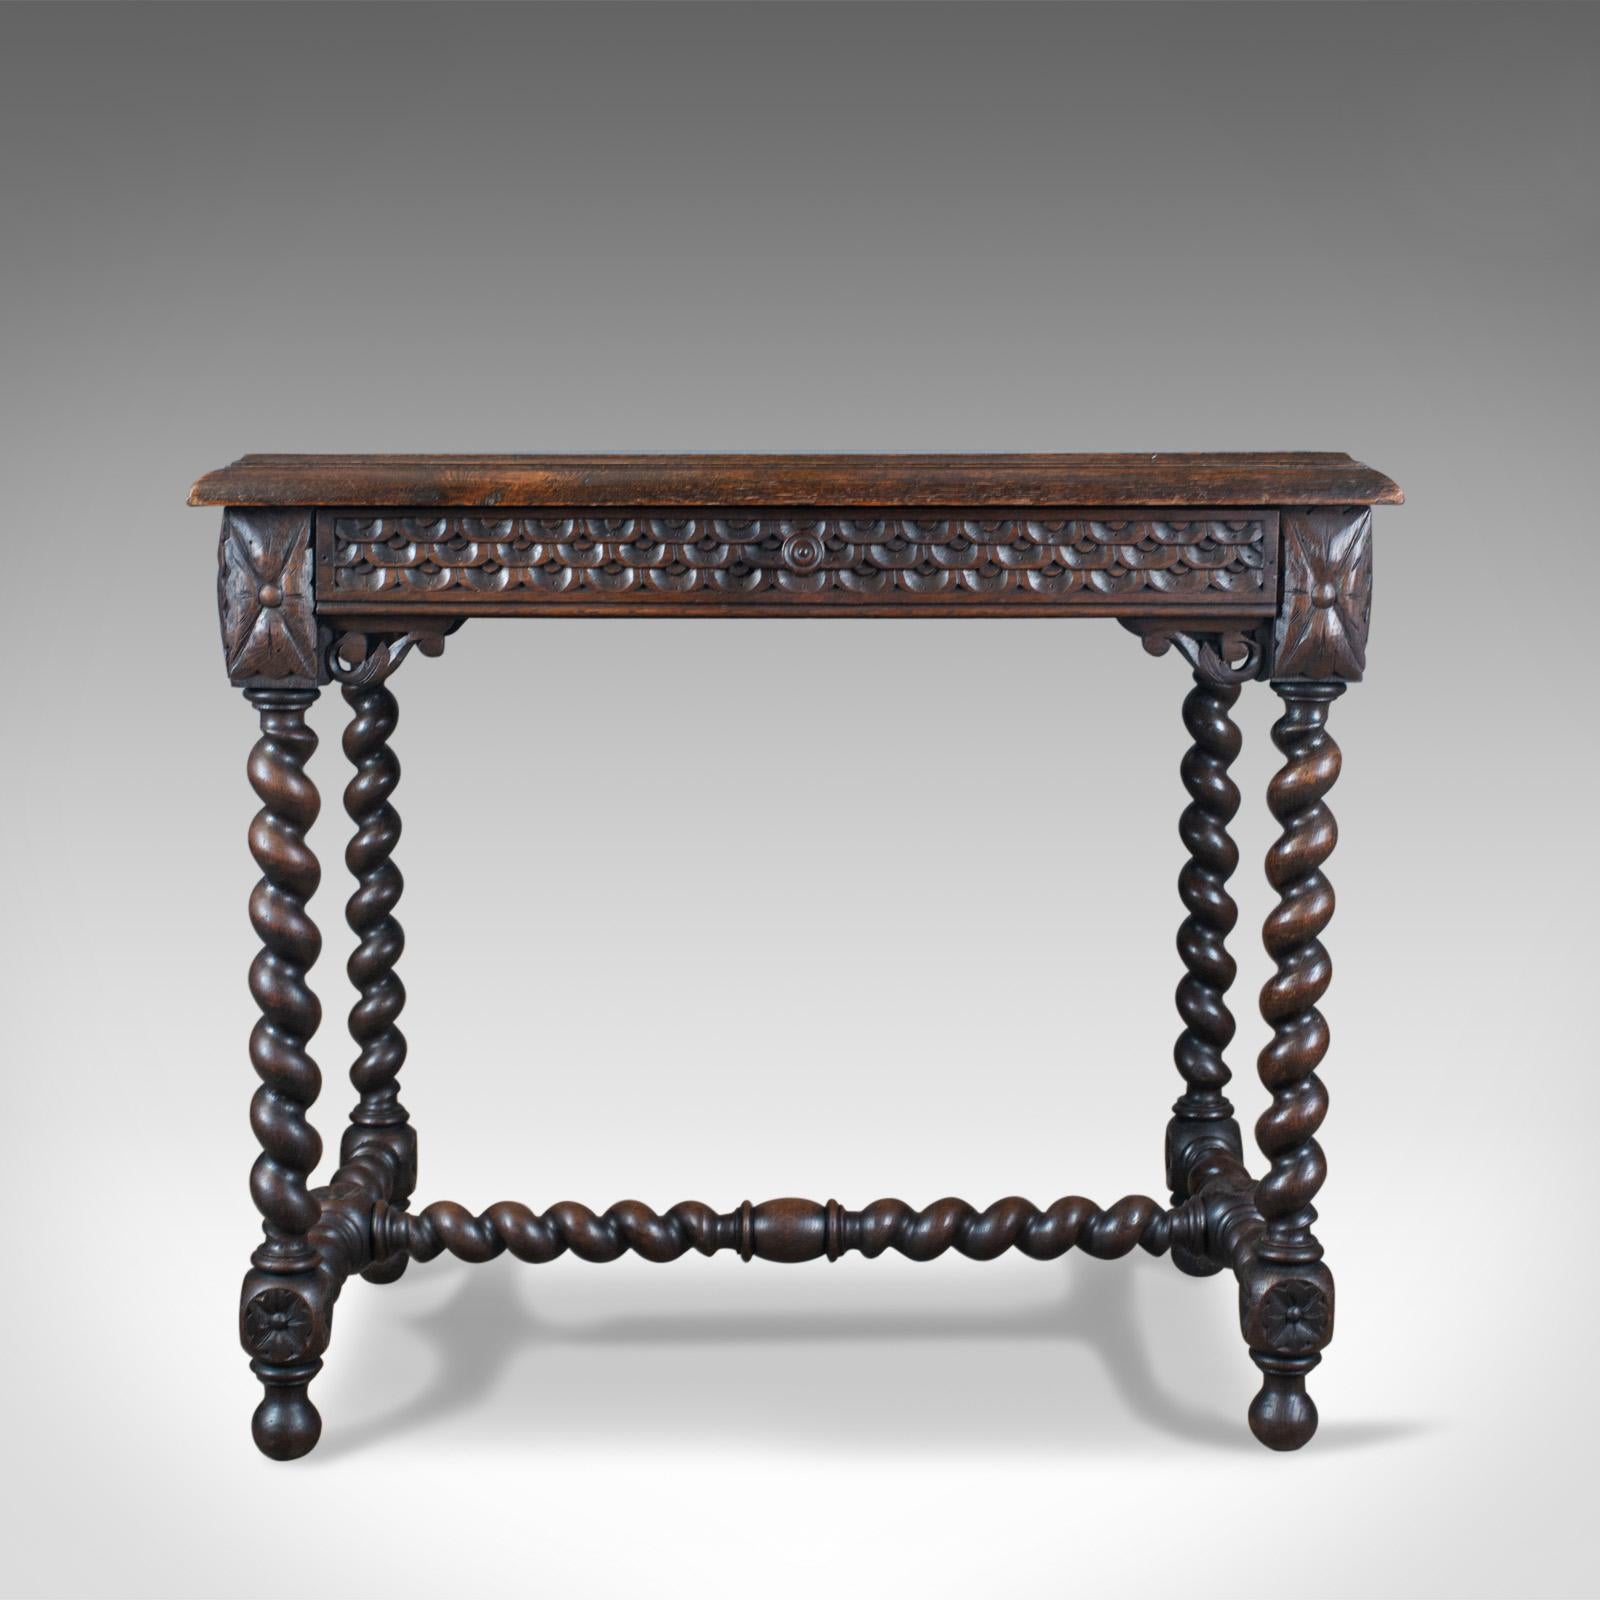 This is an antique table from the late 19th century. Scottish oak with carved decoration. Raised on barley twist legs, this side table dates to circa 1880.

A handsome side table displaying good colour and grain interest
The top displays well